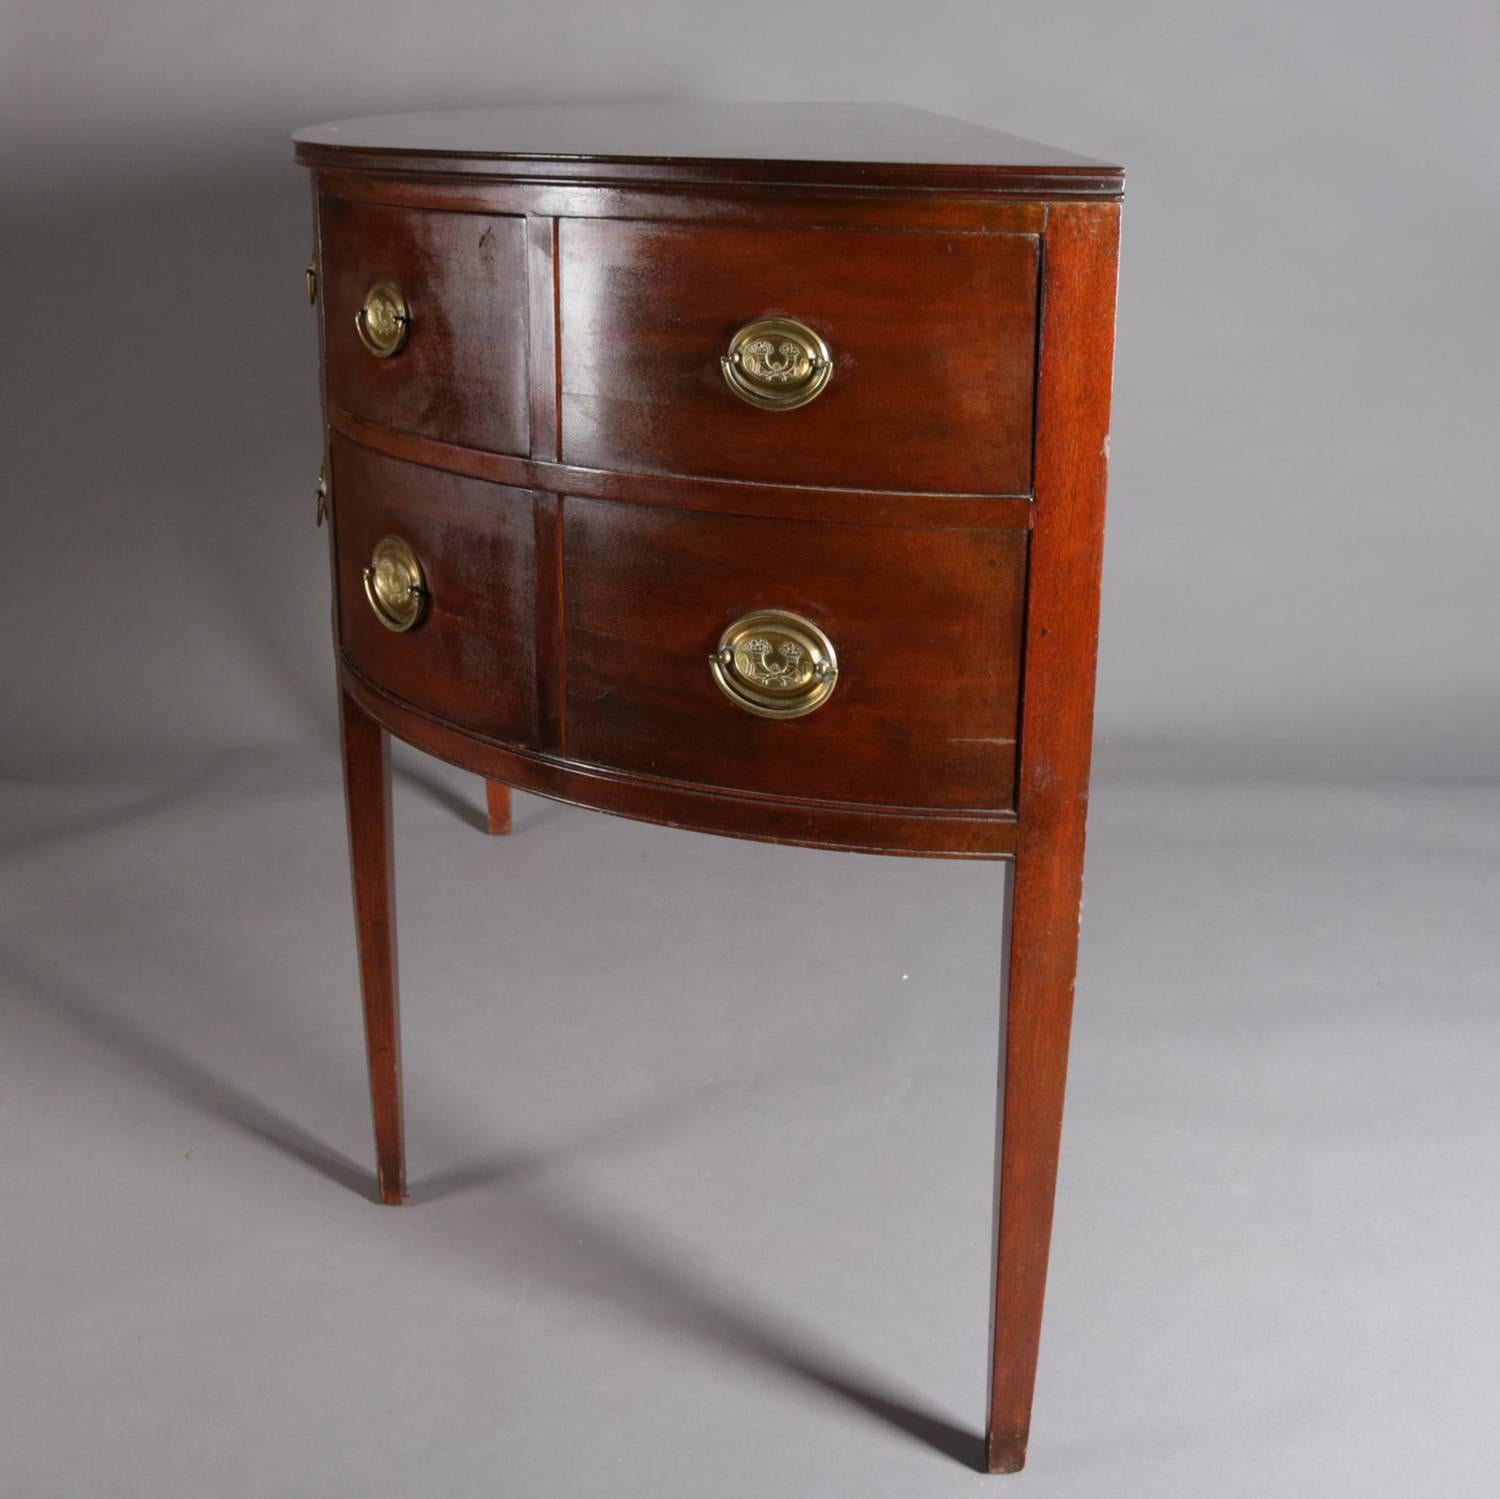 Embossed Antique Federal Demilune Six-Drawer Mahogany & Bronze Sideboard, 20th Century